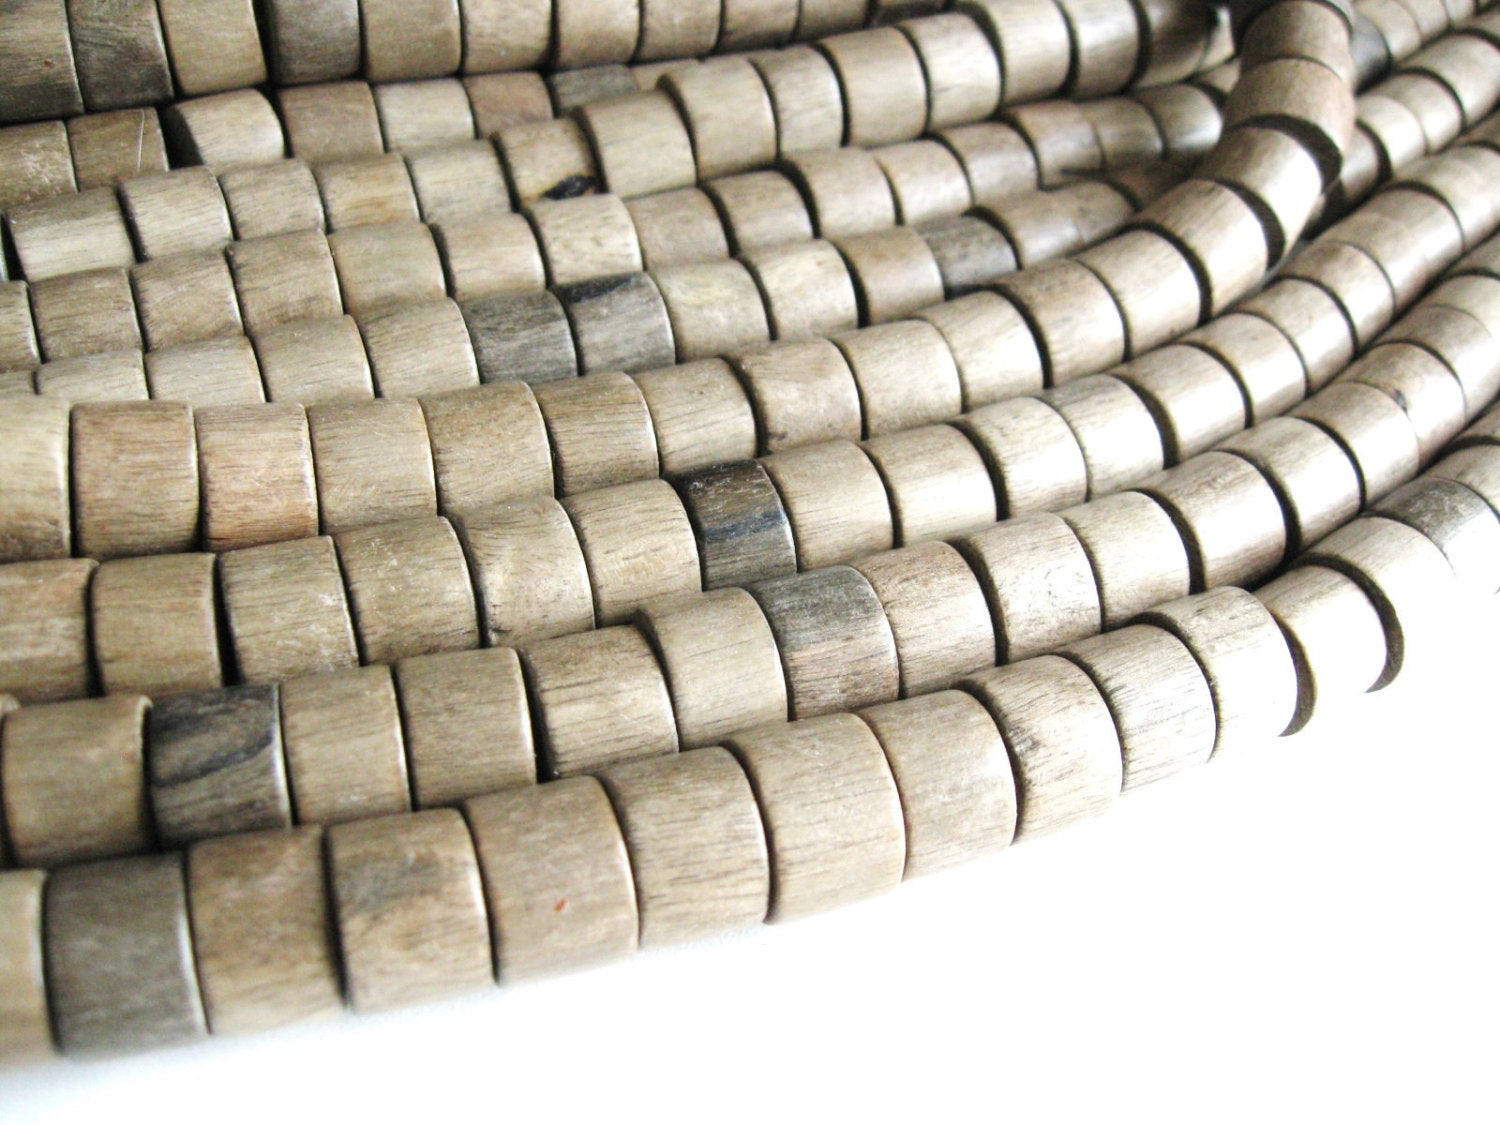 10 Large Taupe Wooden Beads - Wheels Greywood Beads 10x15mm